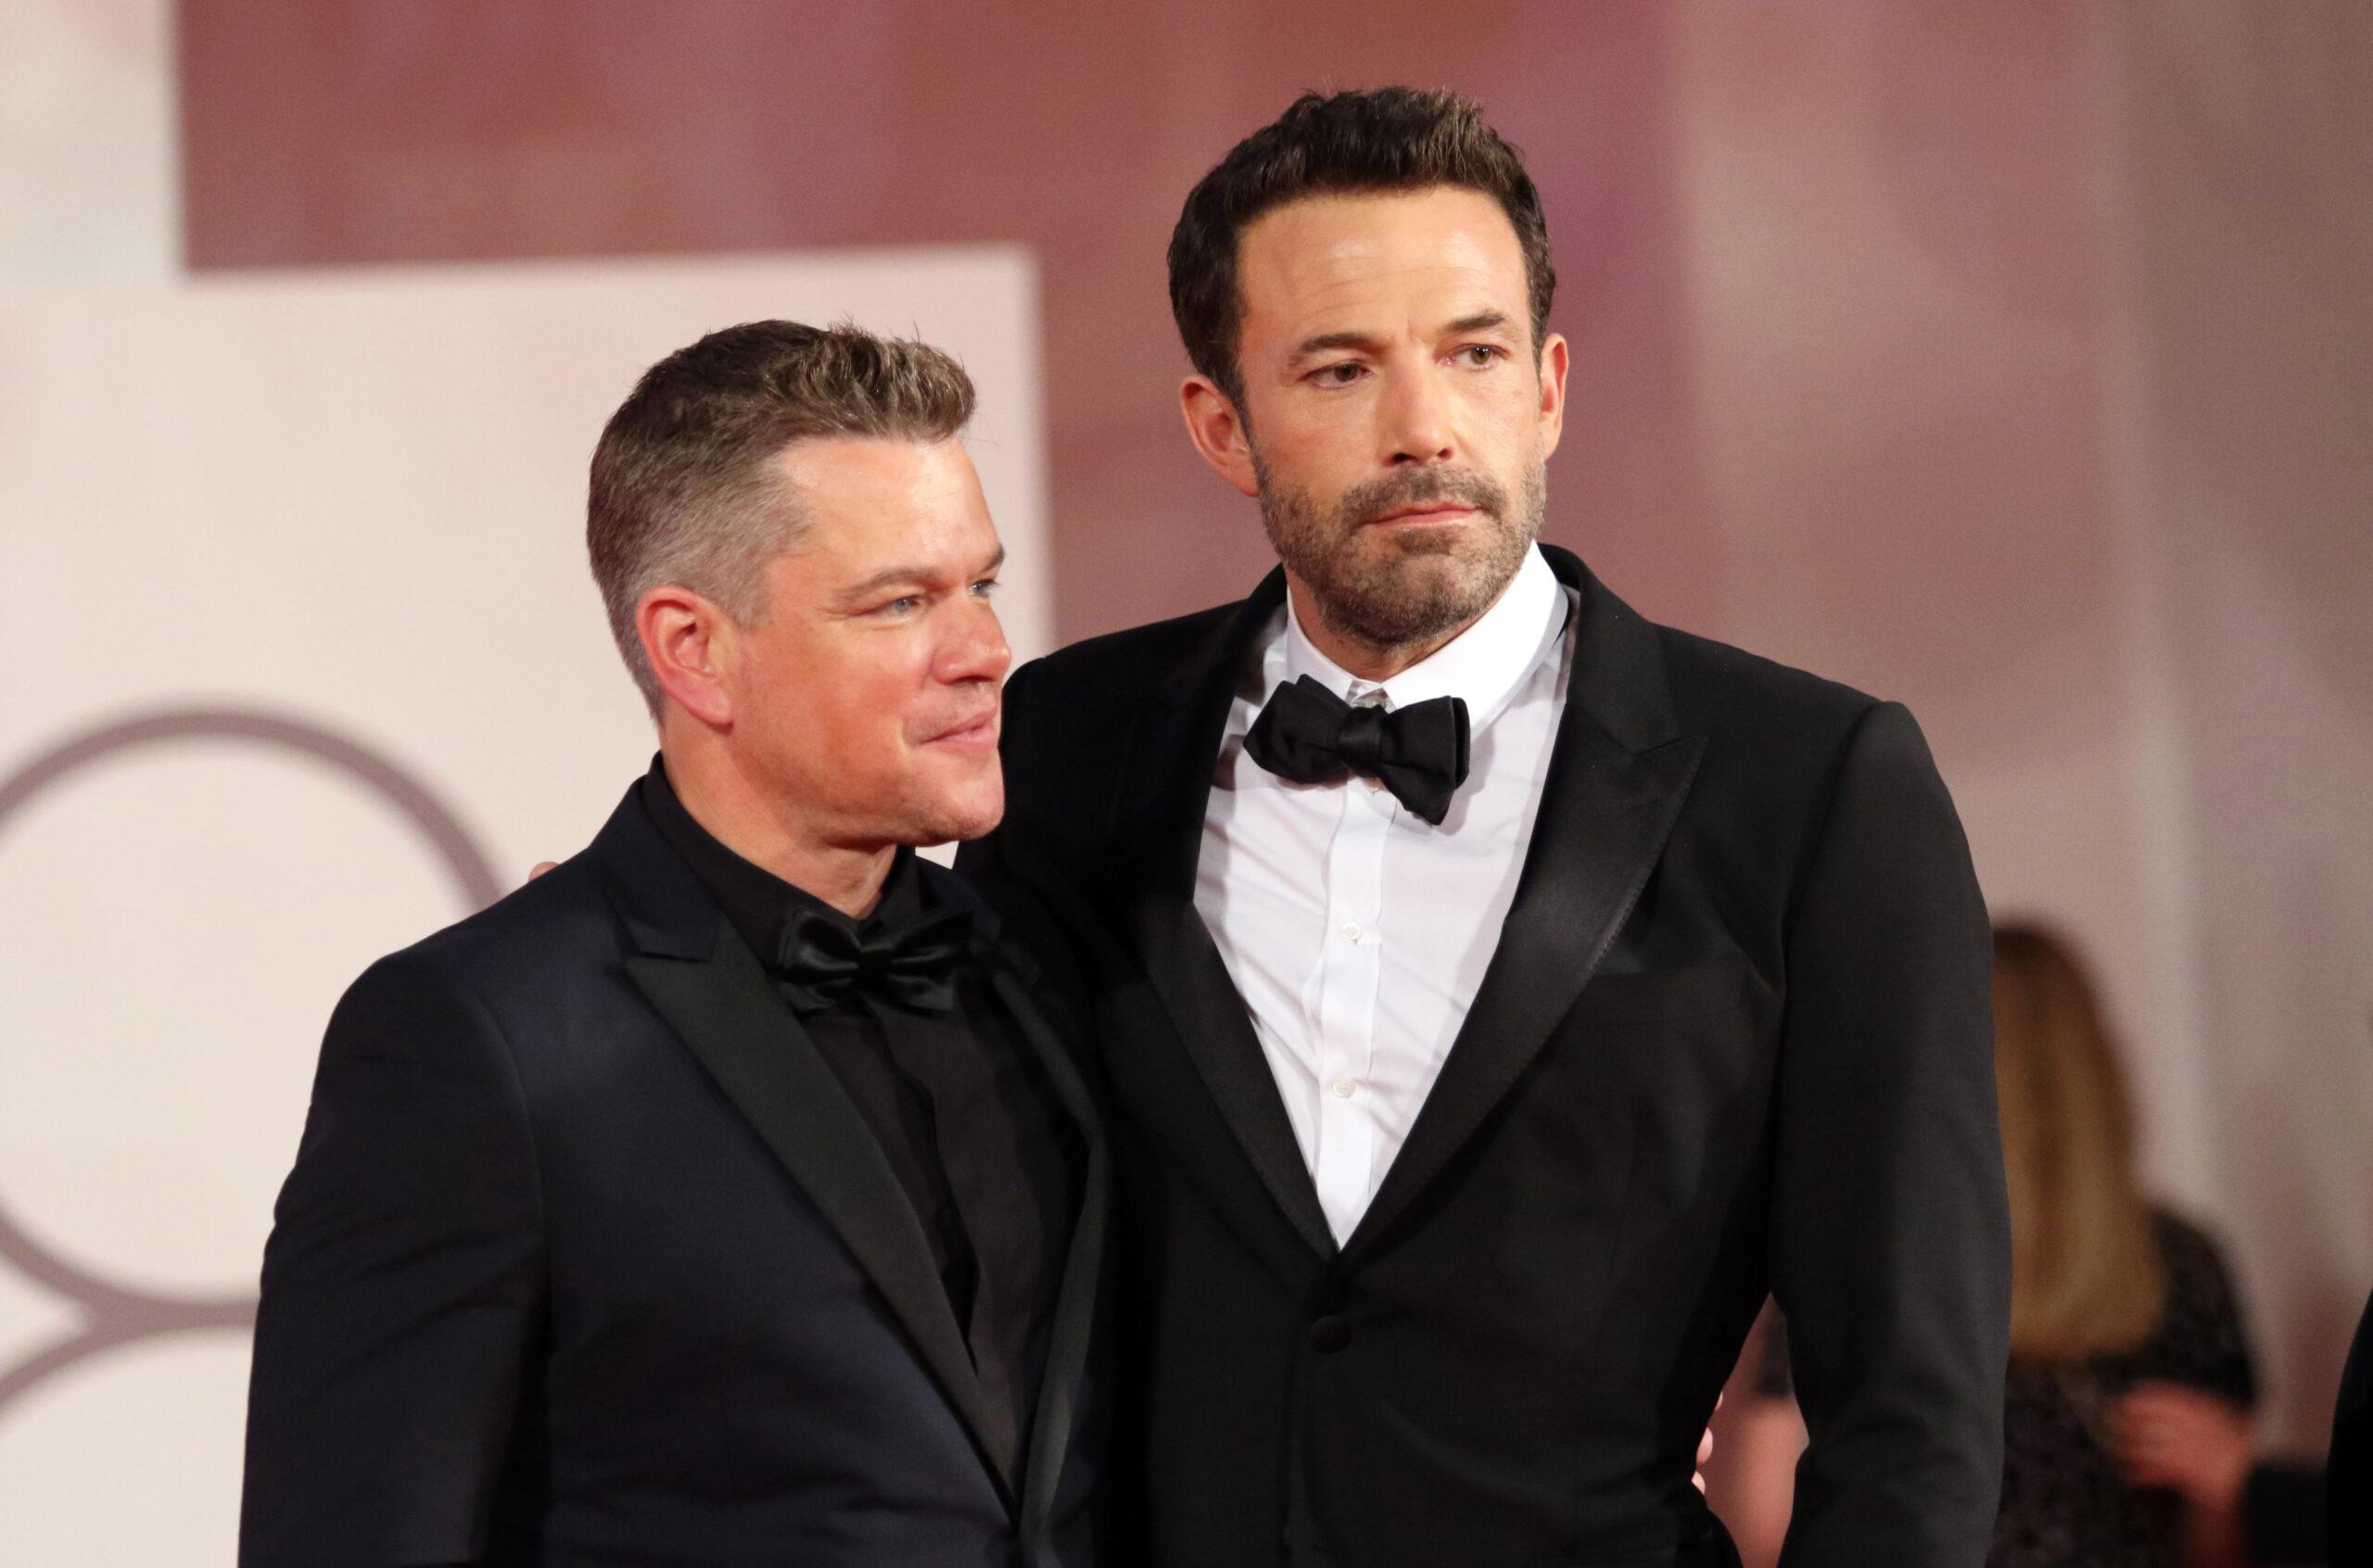 Matt Damon and Ben Affleck attend the red carpet of the movie 'The Last Duel' at the 78th Venice International Film Festival